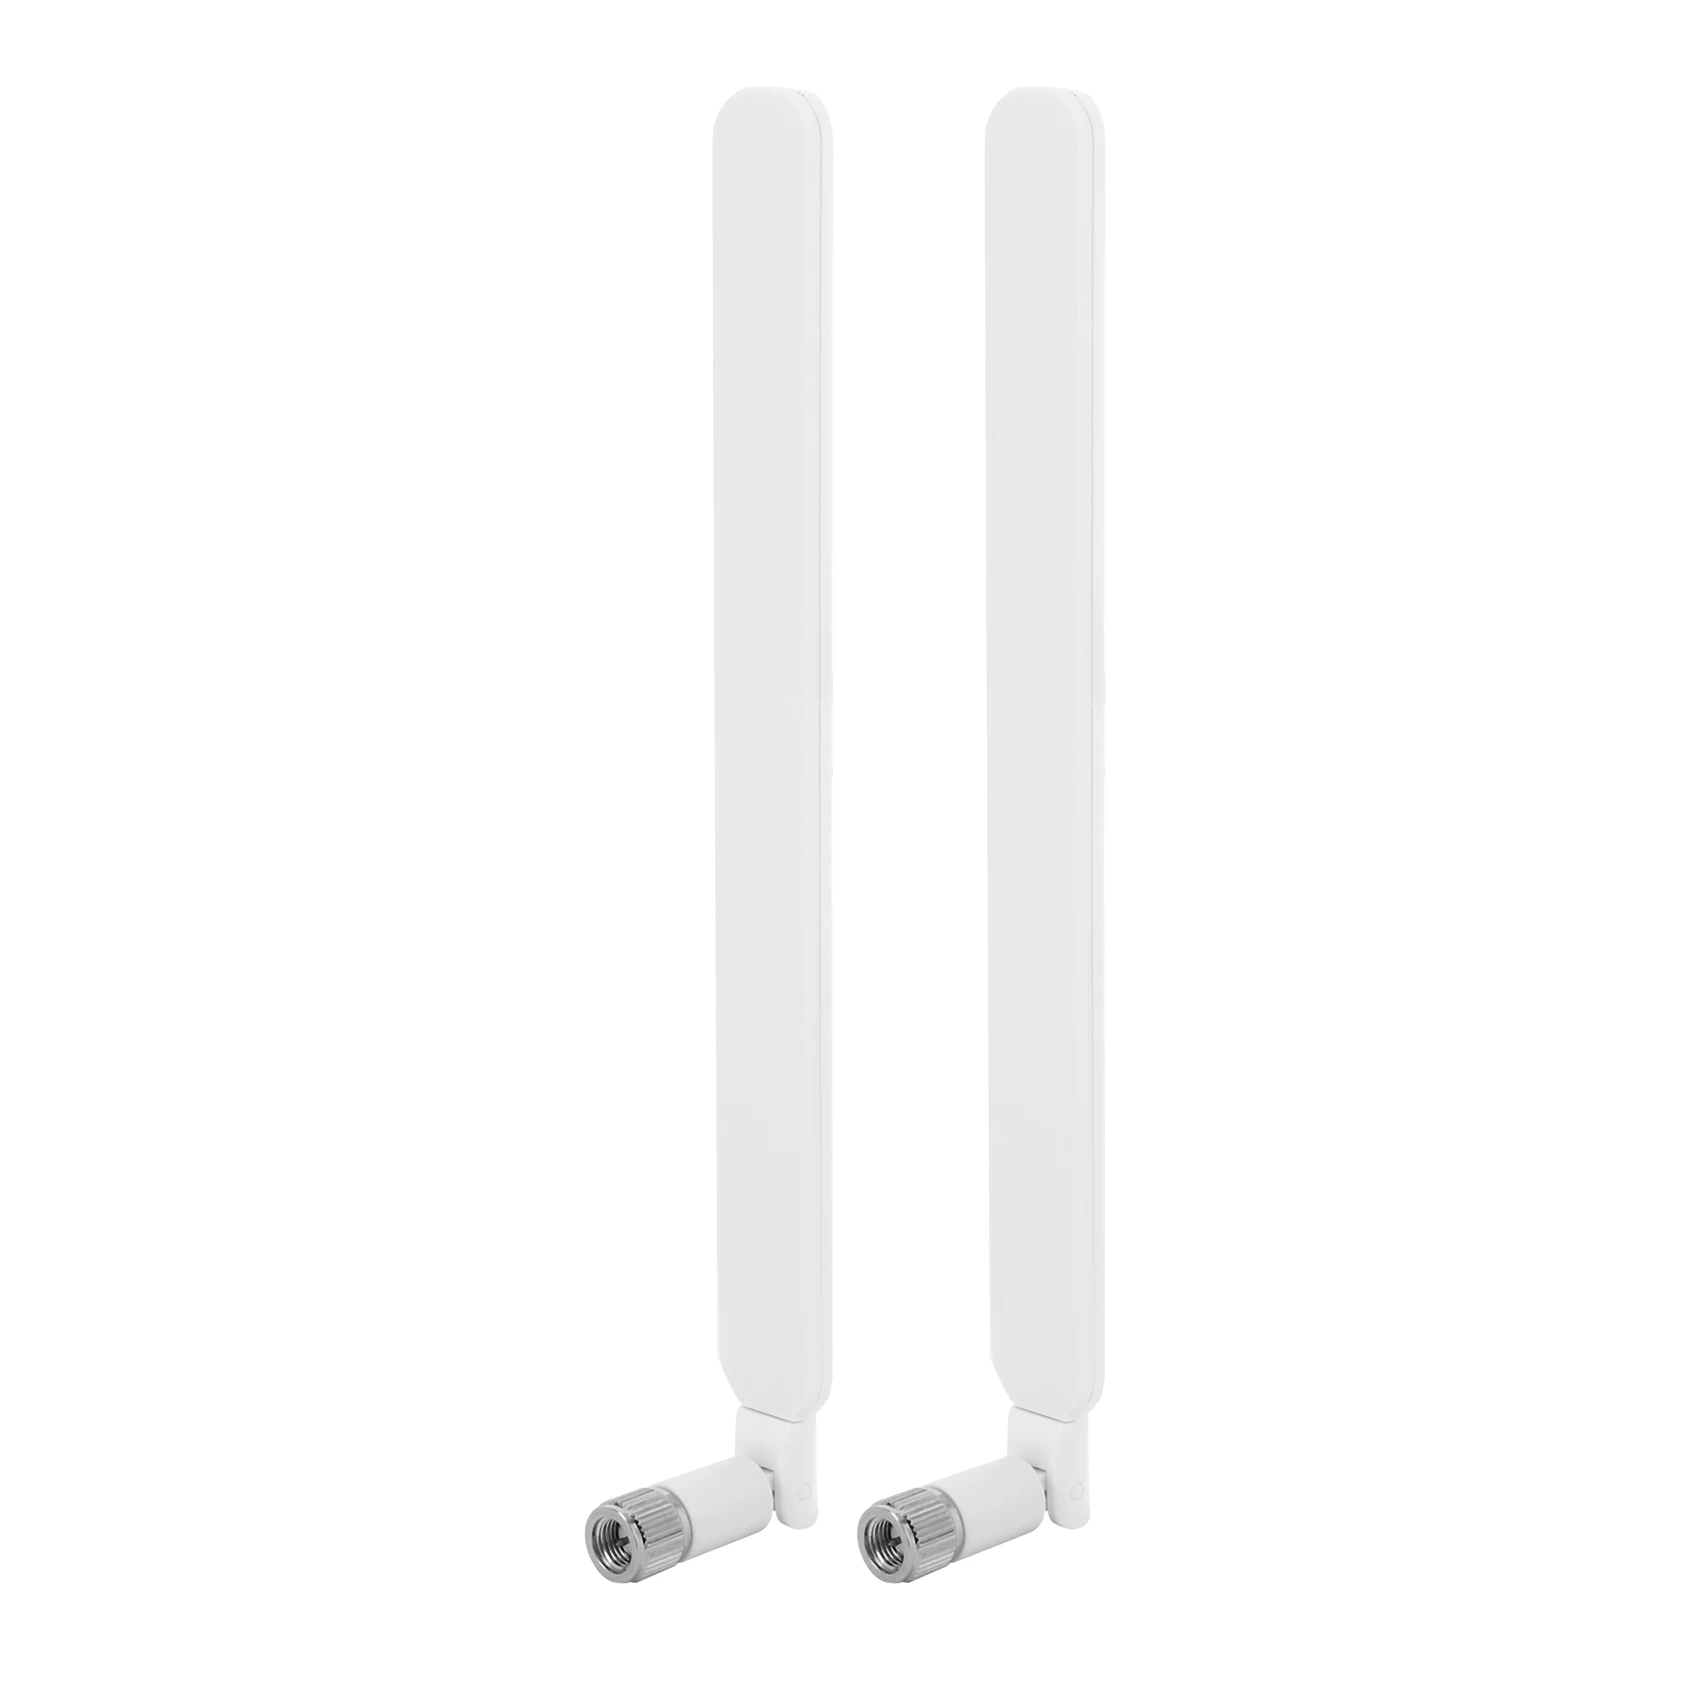 

Router Antena 4G Antenna SMA Male for 4G LTE Router External Antenna for B593 E5186 for B315 B310 698-2700MHz 2Pcs